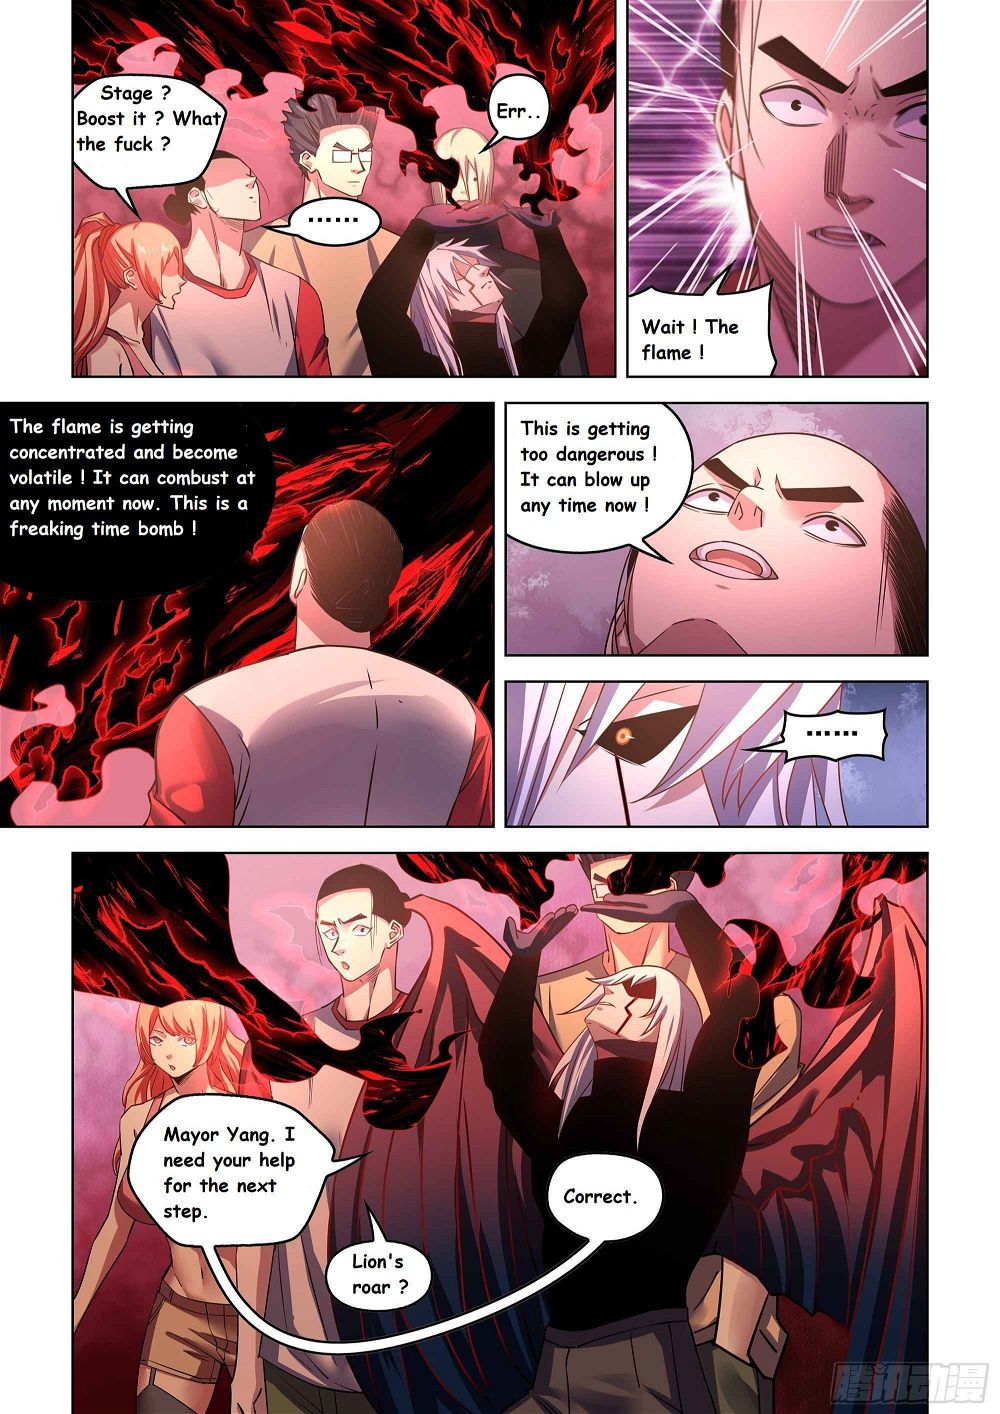 The Last Human Chapter 523 - Page 12